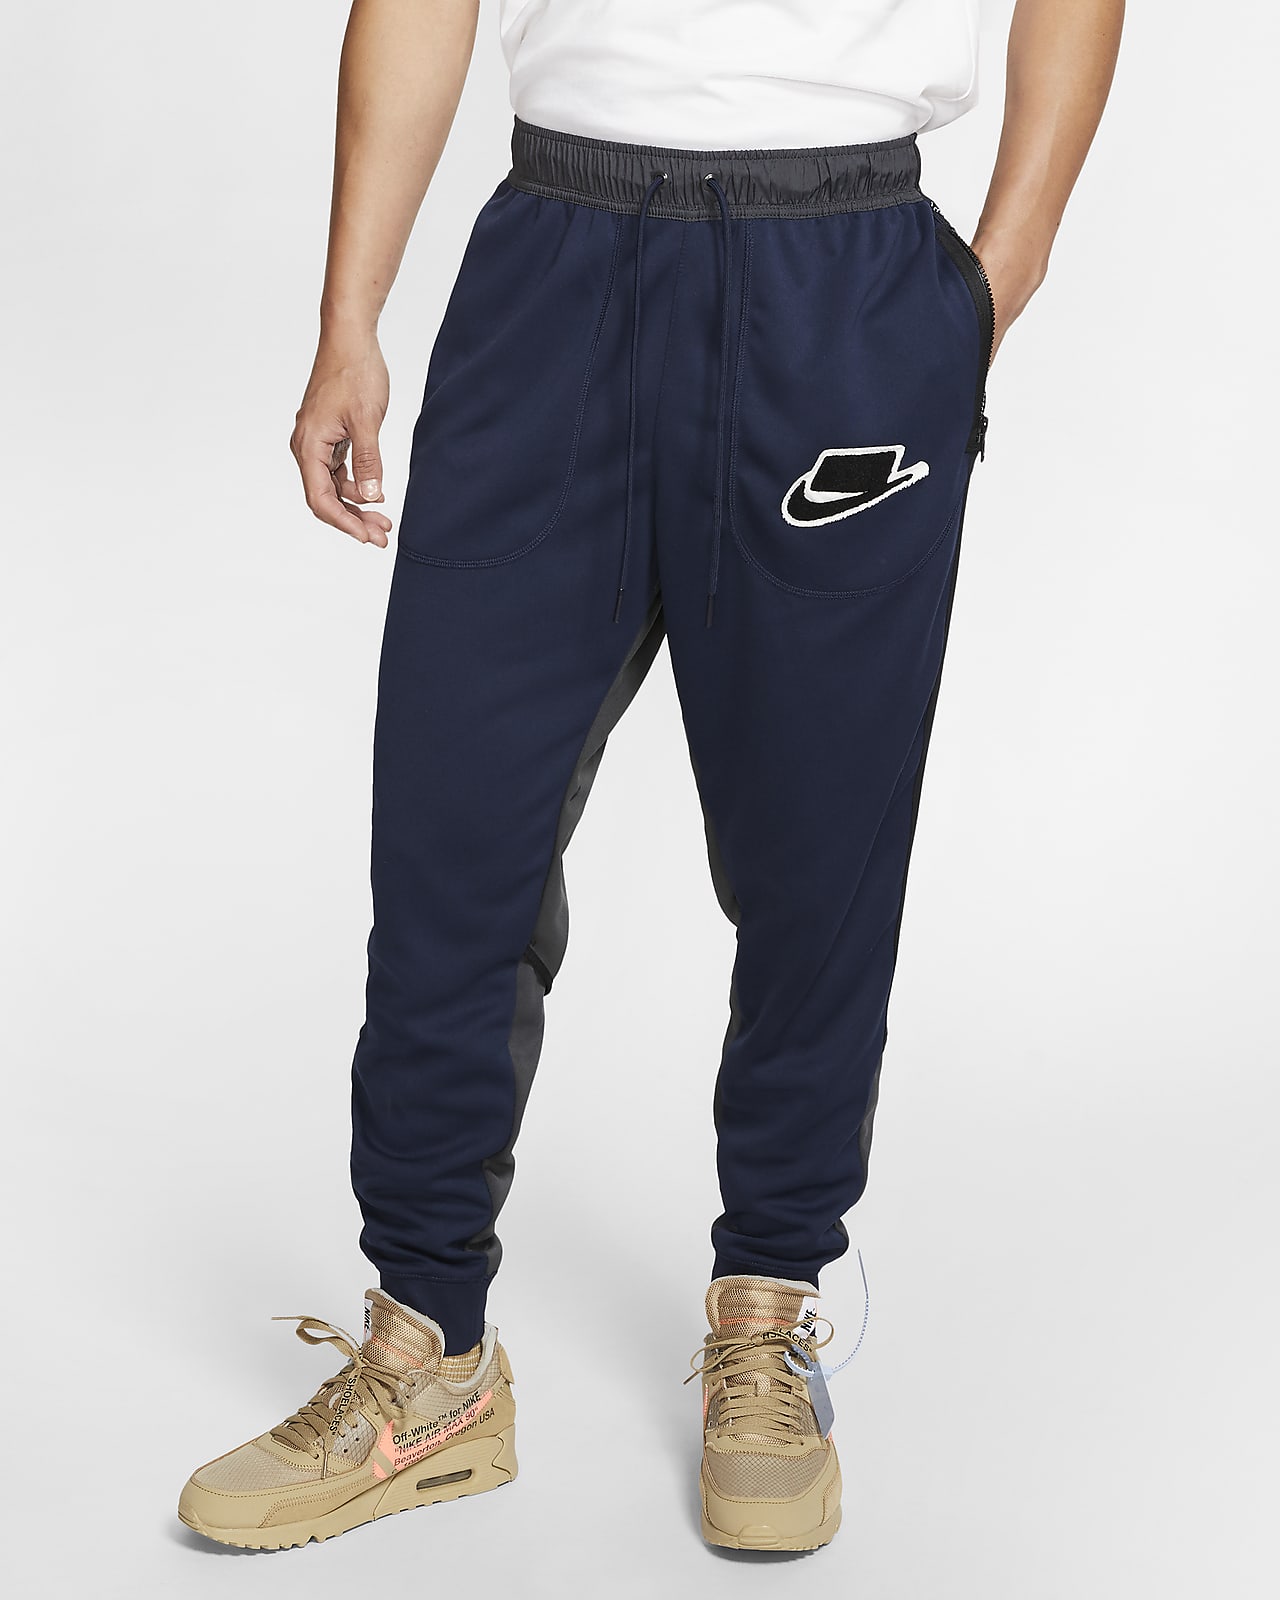 Buy > nike tracksuit bottoms sports direct > in stock